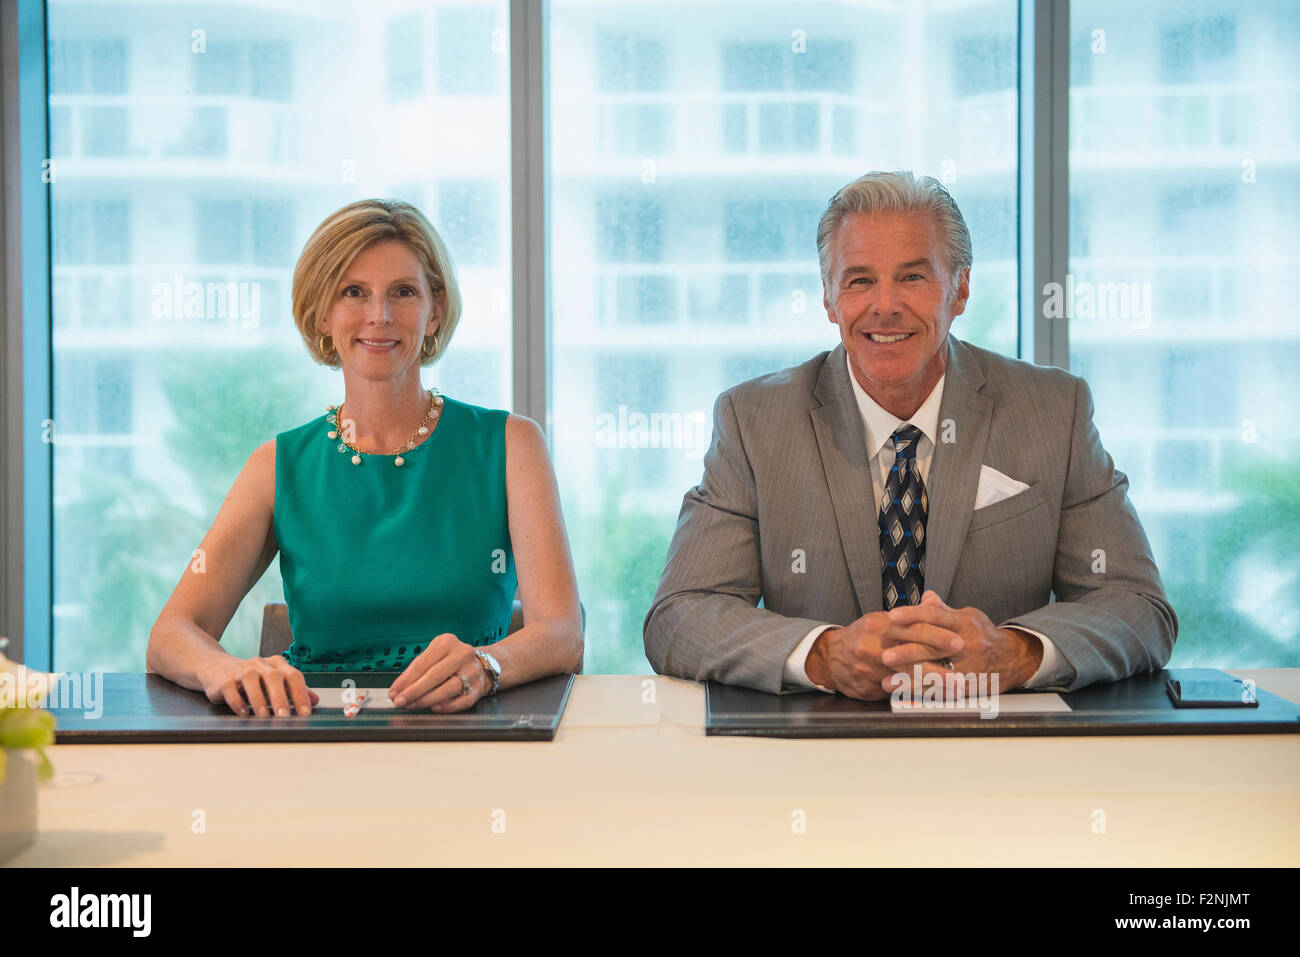 Caucasian business people smiling in meeting Stock Photo